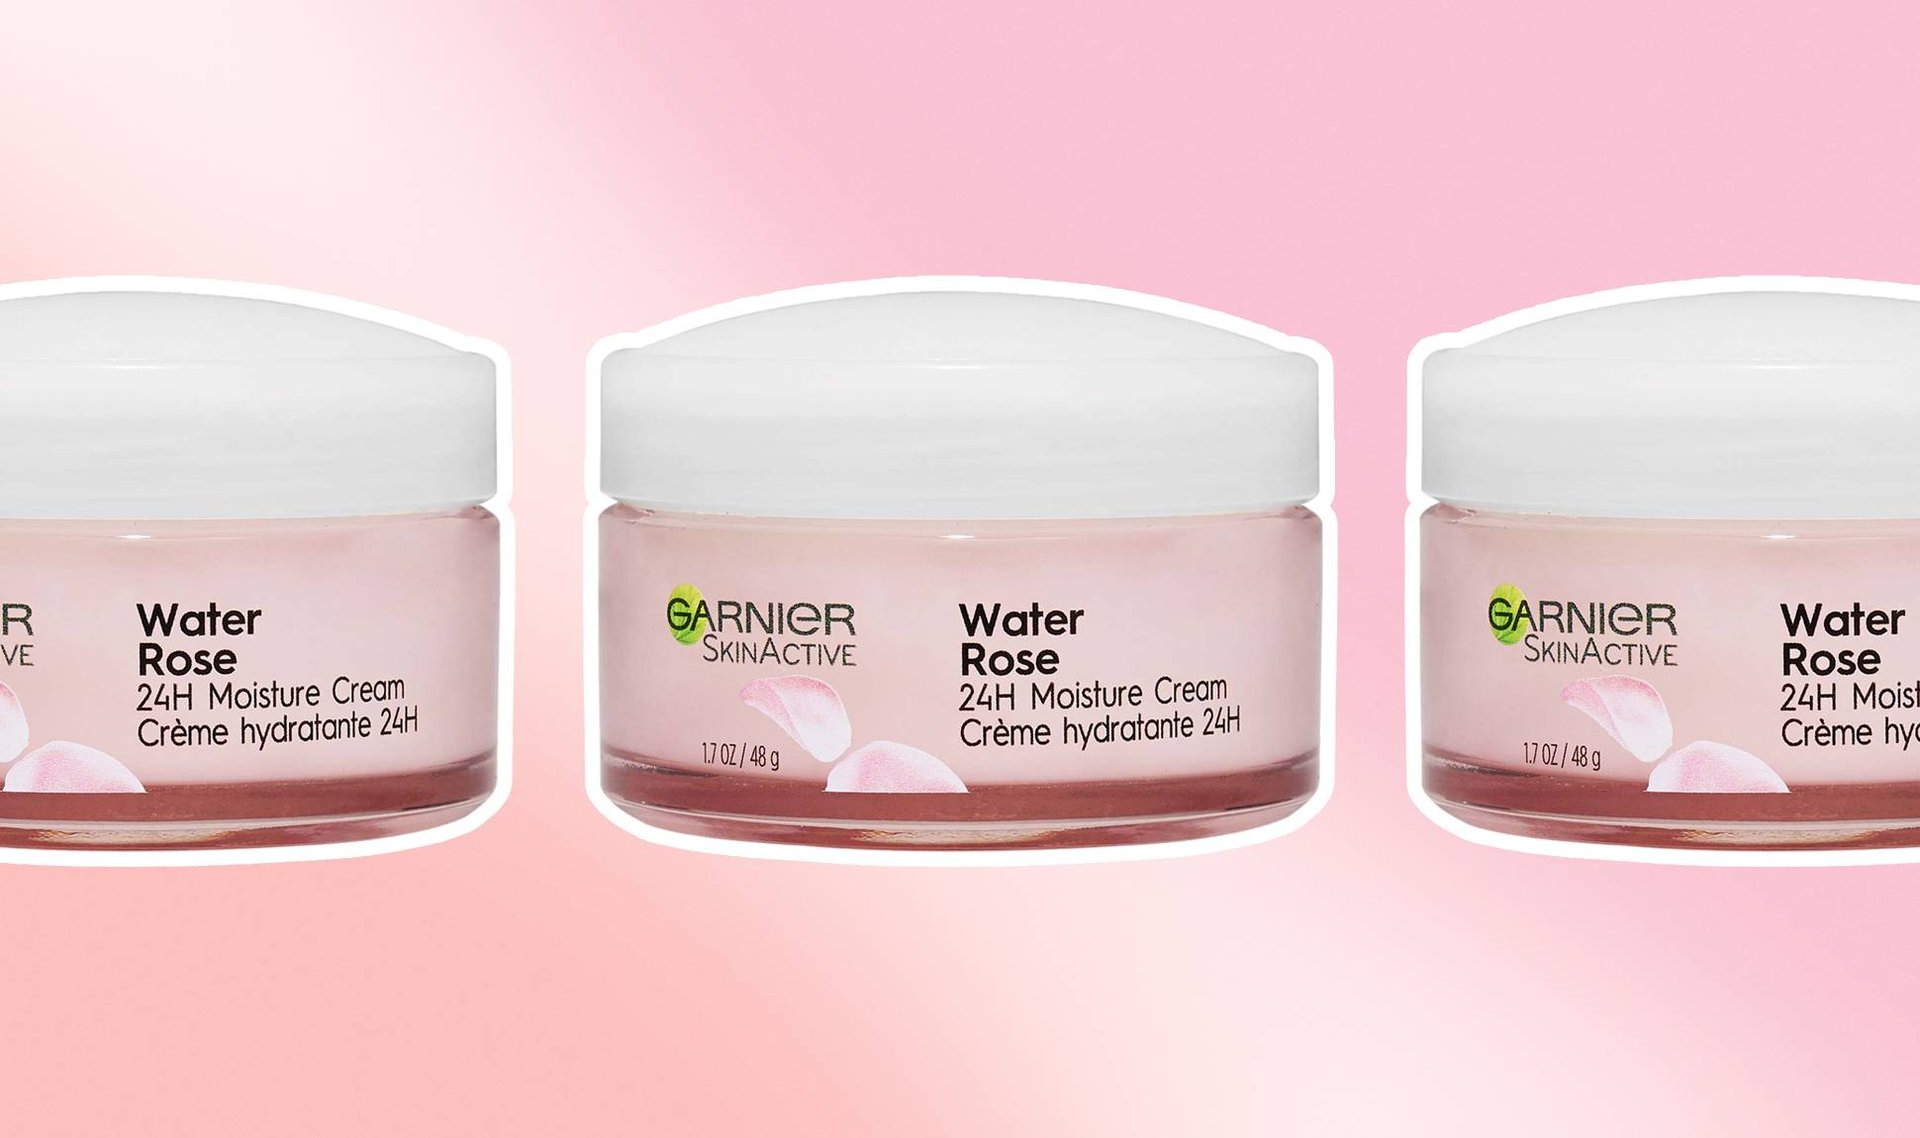 The Garnier Water Rose 24H Moisture Cream Is Like a Treat for Dry Fall Skin